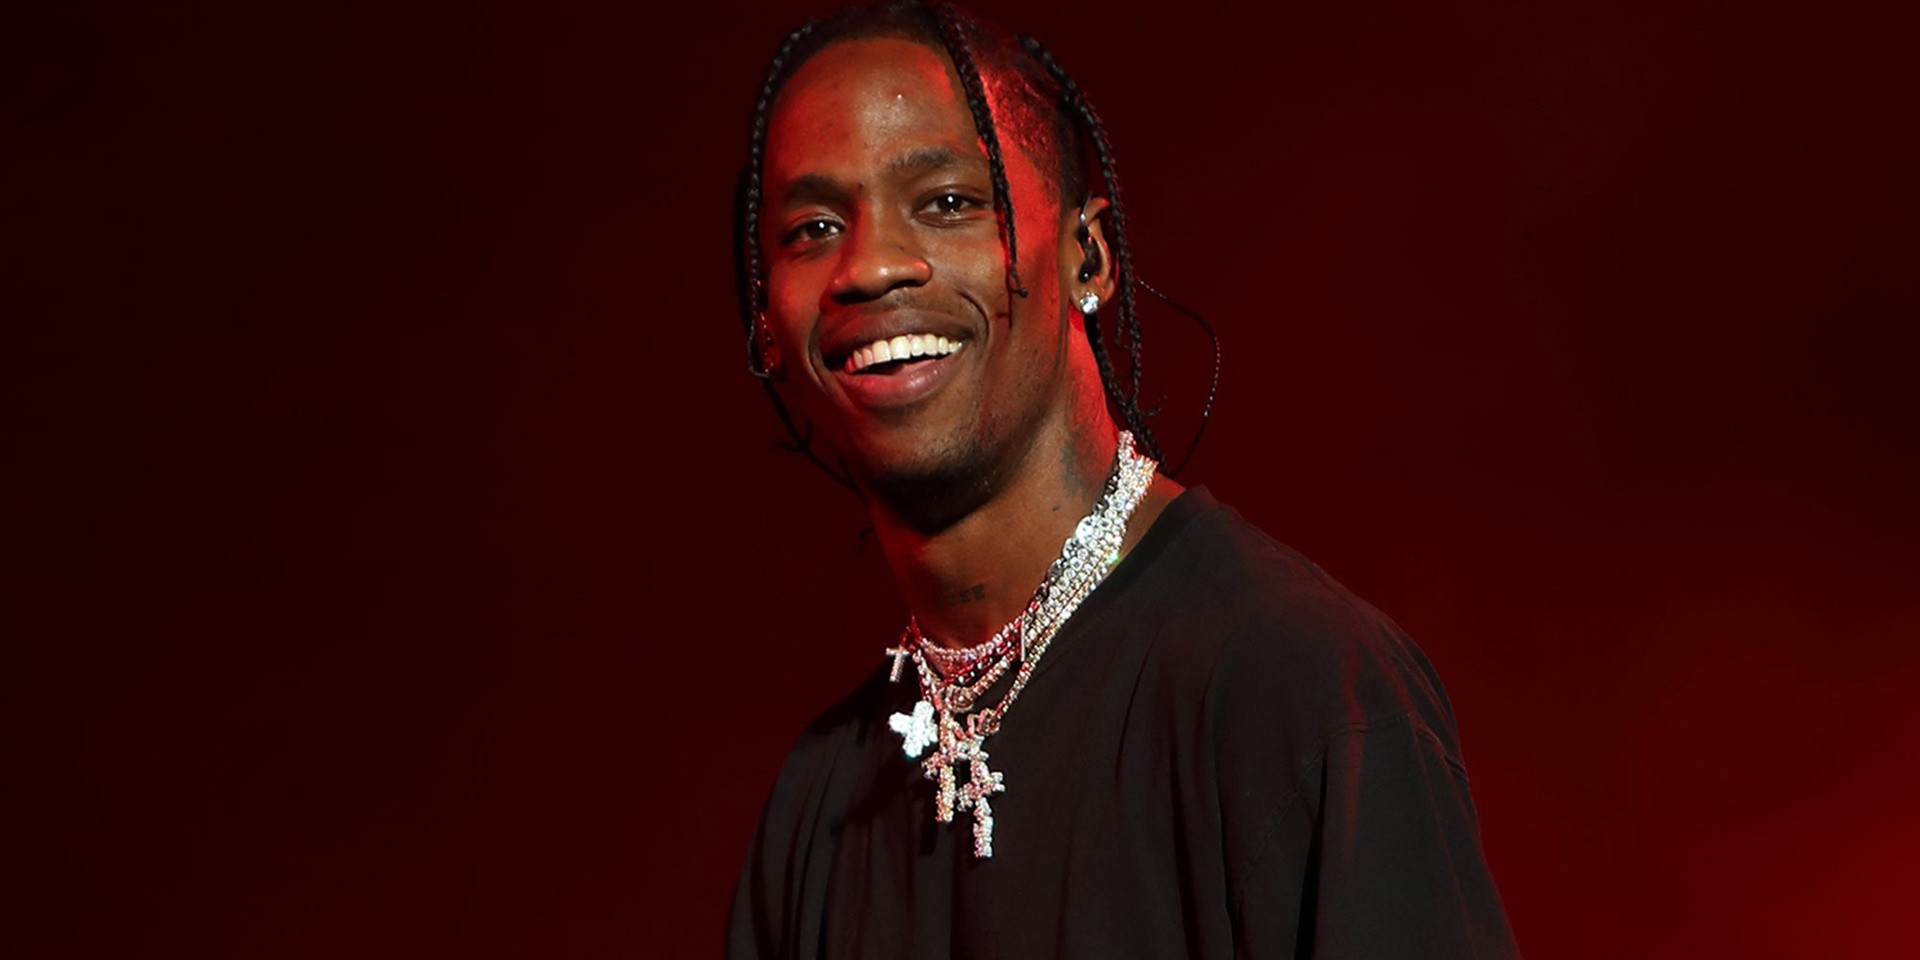 Travis Scott to release new single 'Highest in the Room' this week